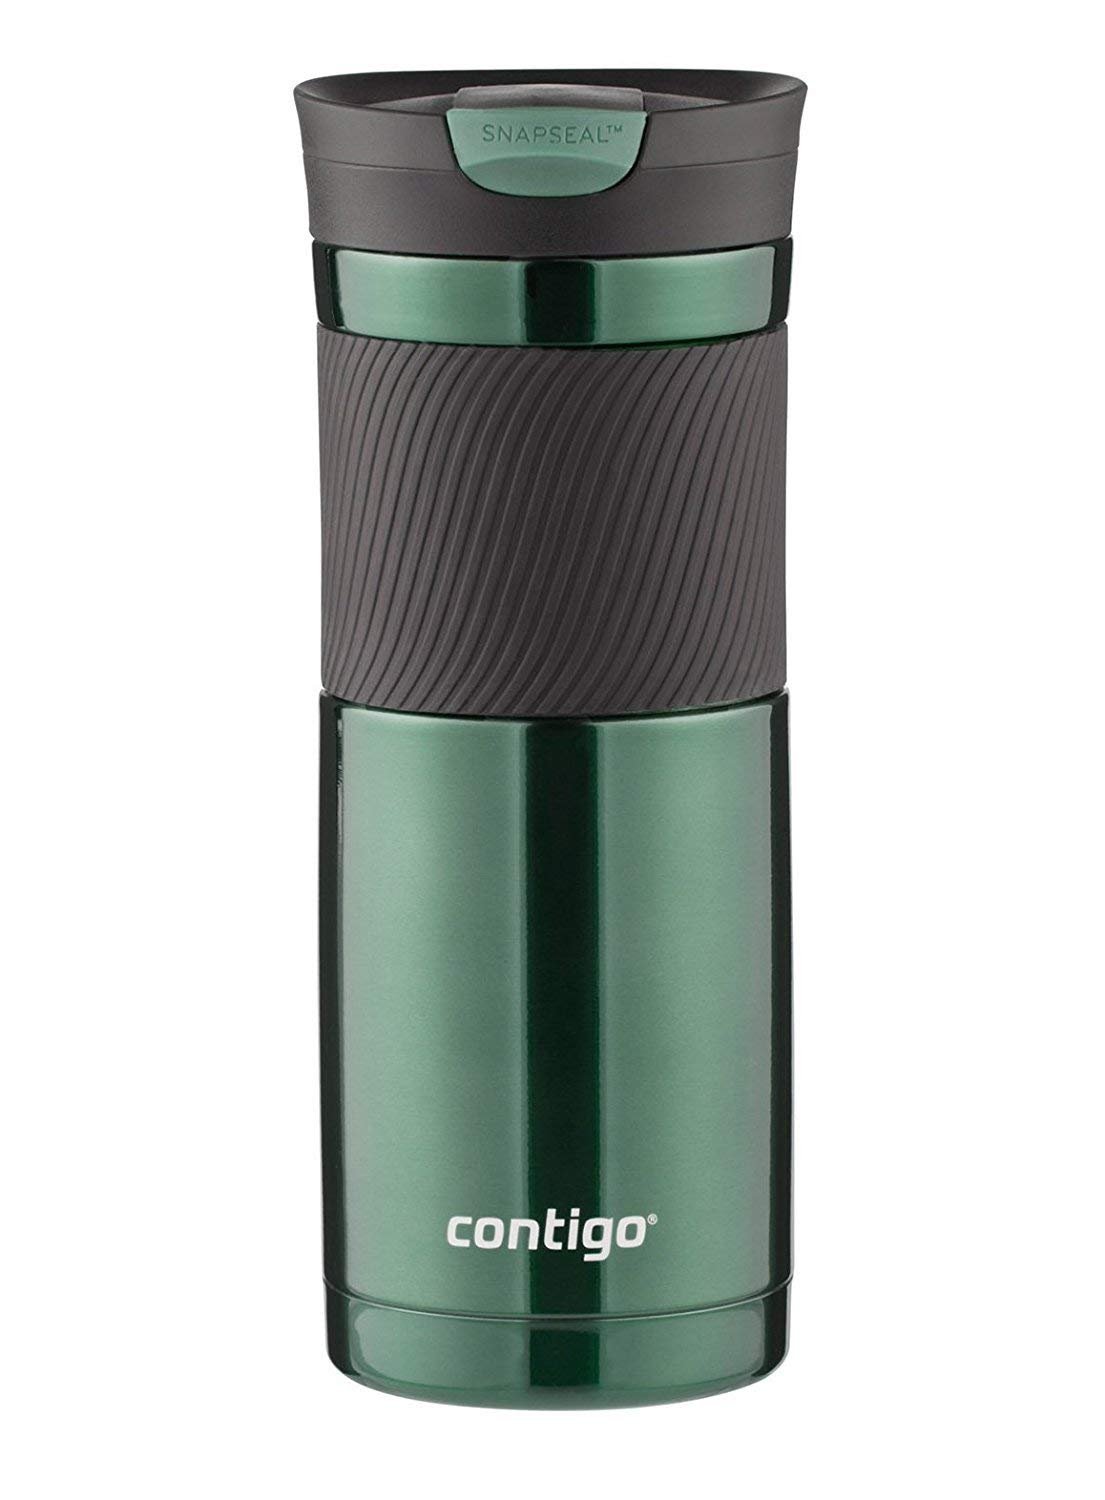 Contigo Autoseal West Loop Stainless Steel Travel Mug with Easy Clean –  Capital Books and Wellness